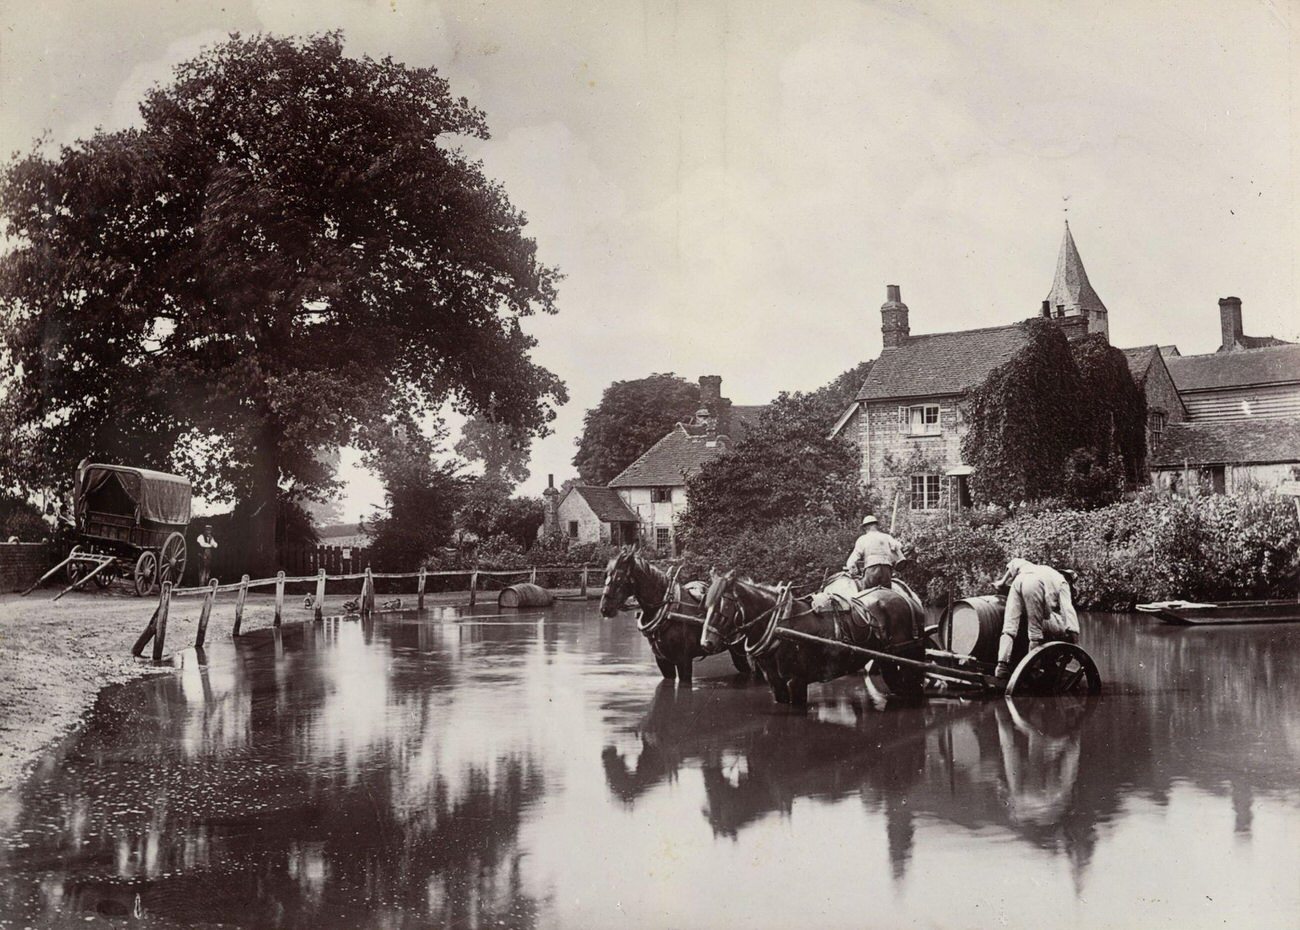 Filling water wagons in an English village, 1890.